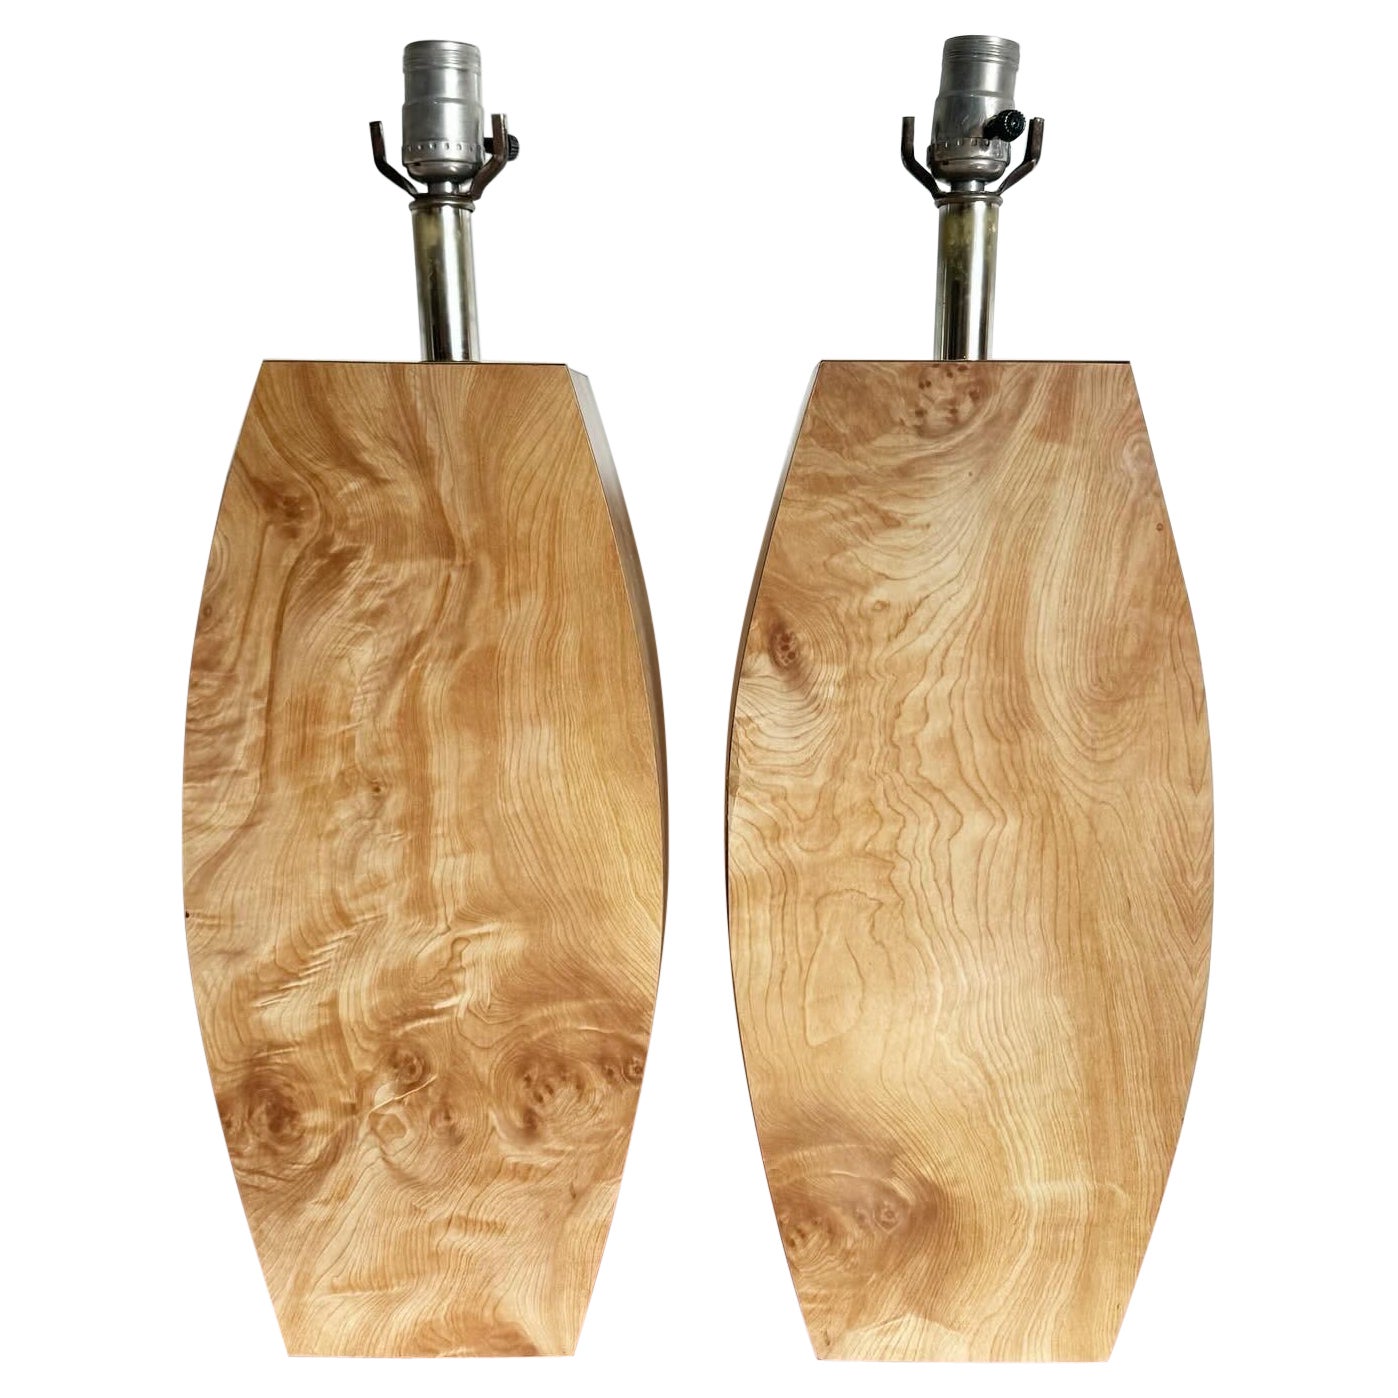 Postmodern Burl Wood Laminate Table Lamps - a Pair For Sale